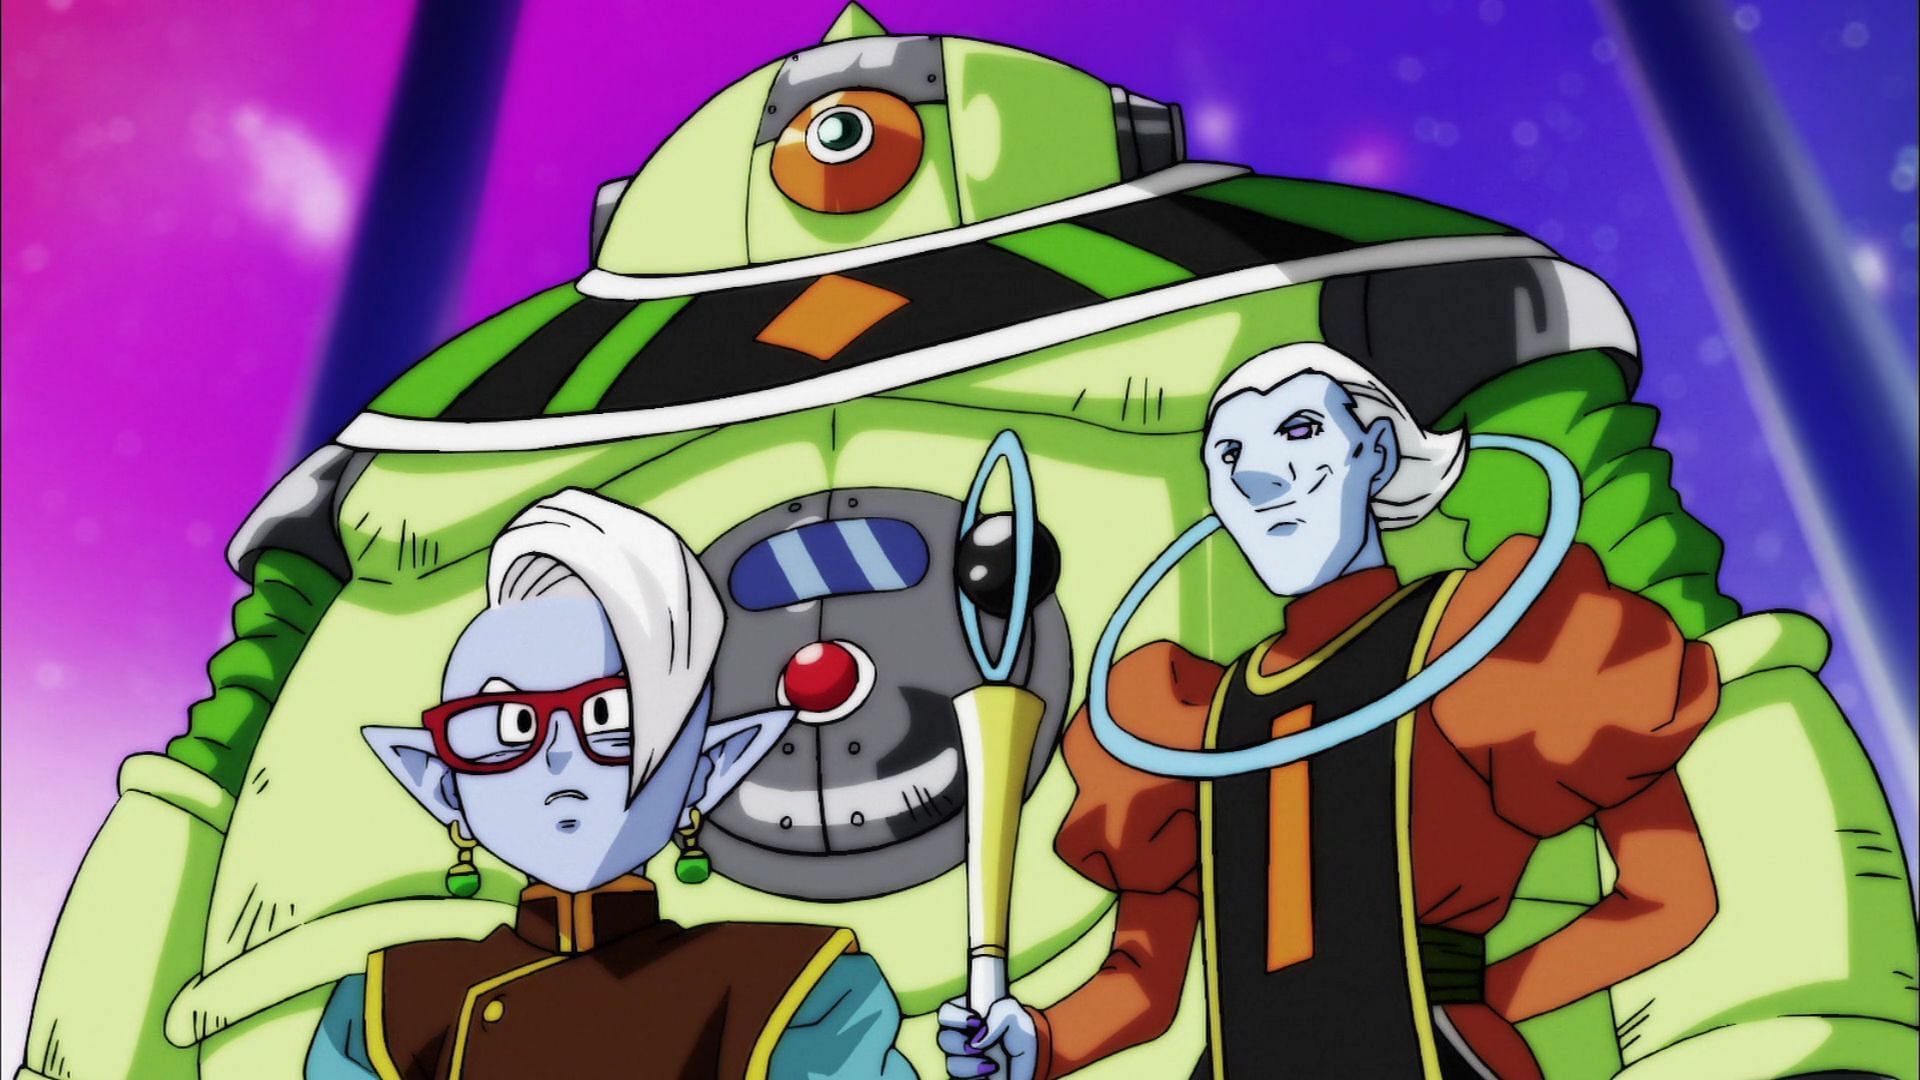 Mosco (Center) with Camparri (right) and Eyre (right) (Image via Toei Animation)